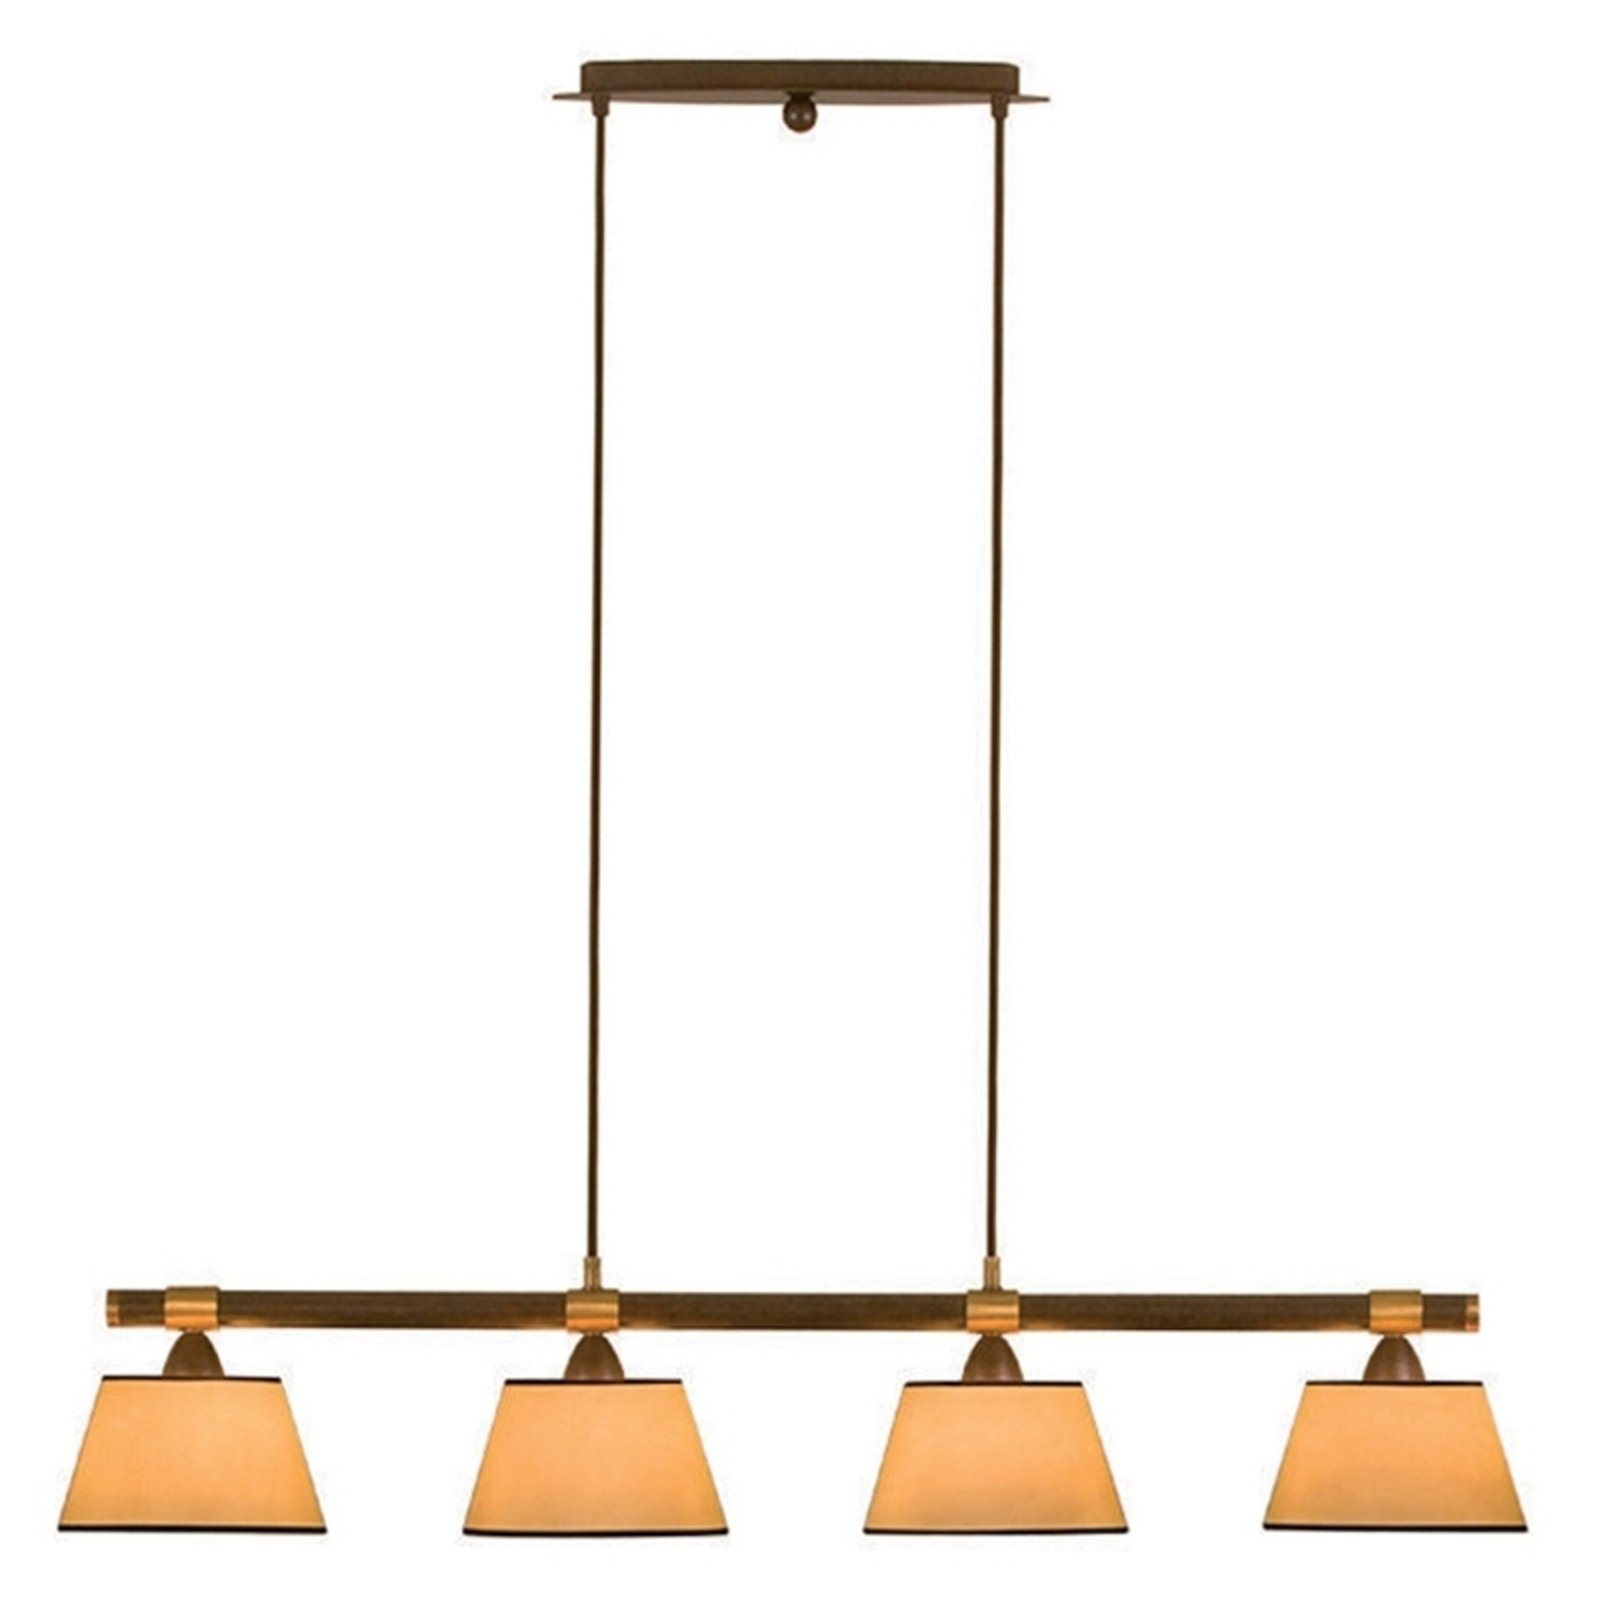 Menzel Living Table - Candeeiro suspenso 4 luzes creme